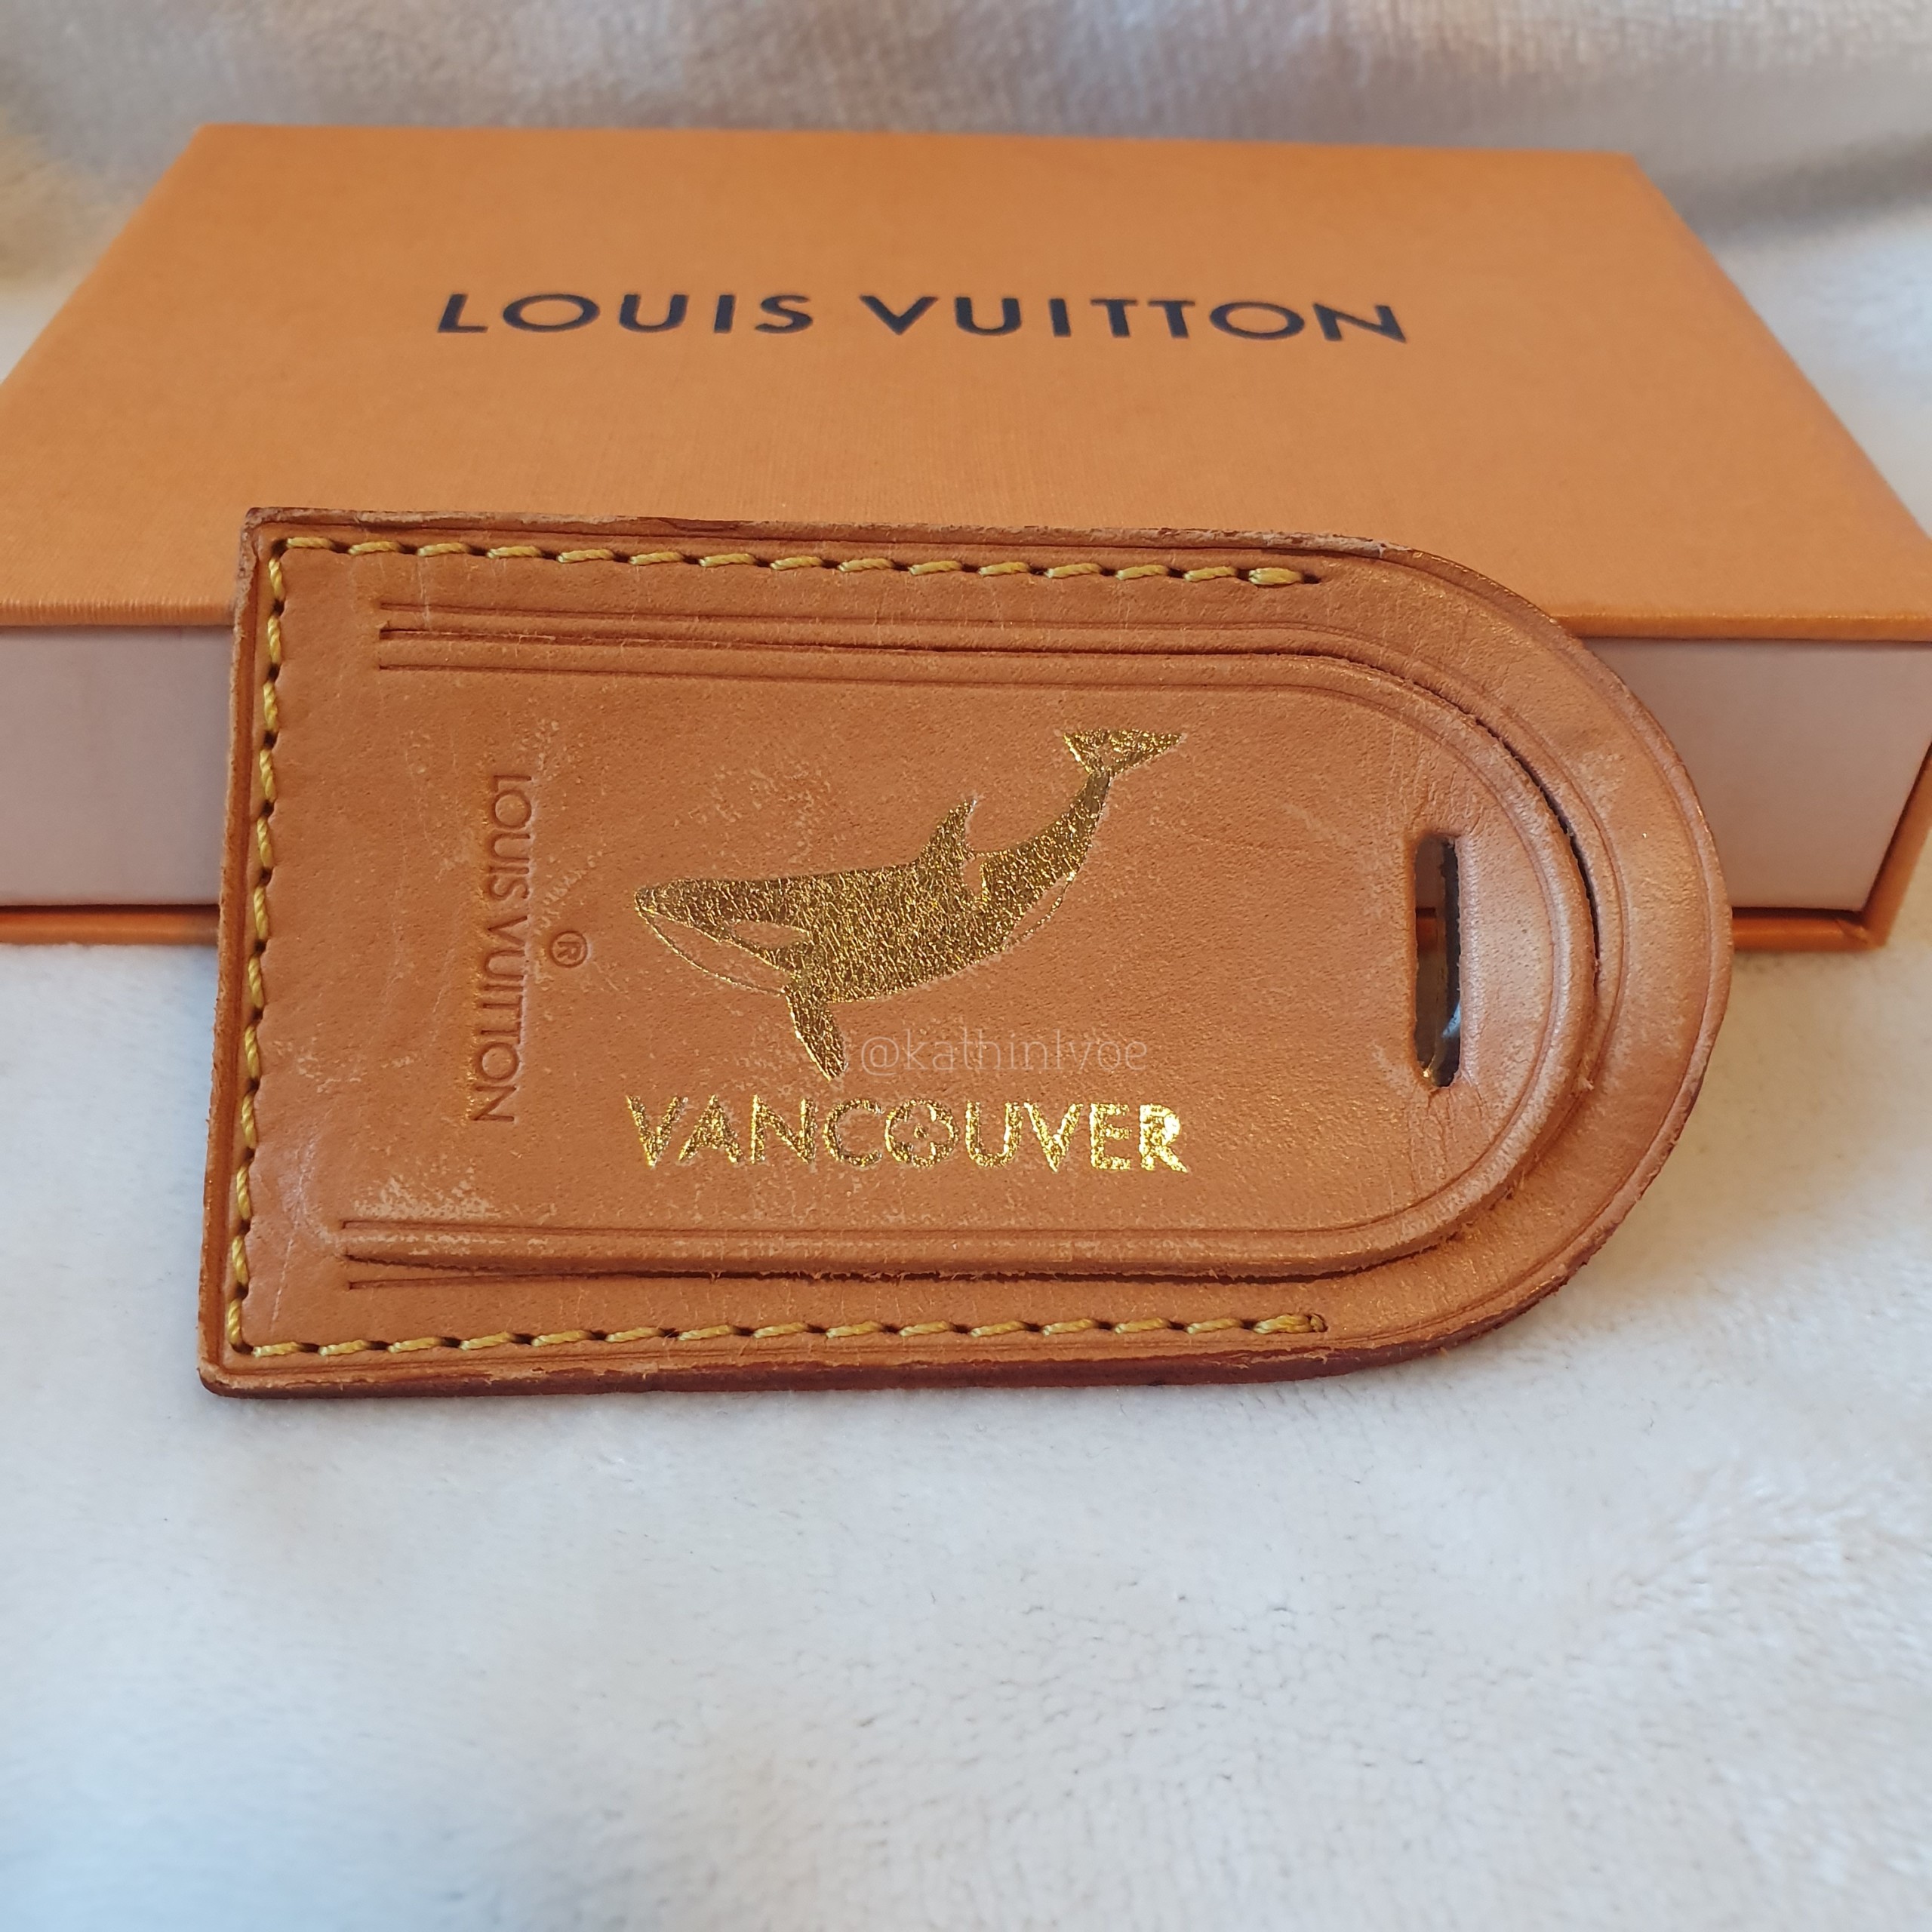 Is the Louis Vuitton Hot Stamp Worth it? • Petite in Paris